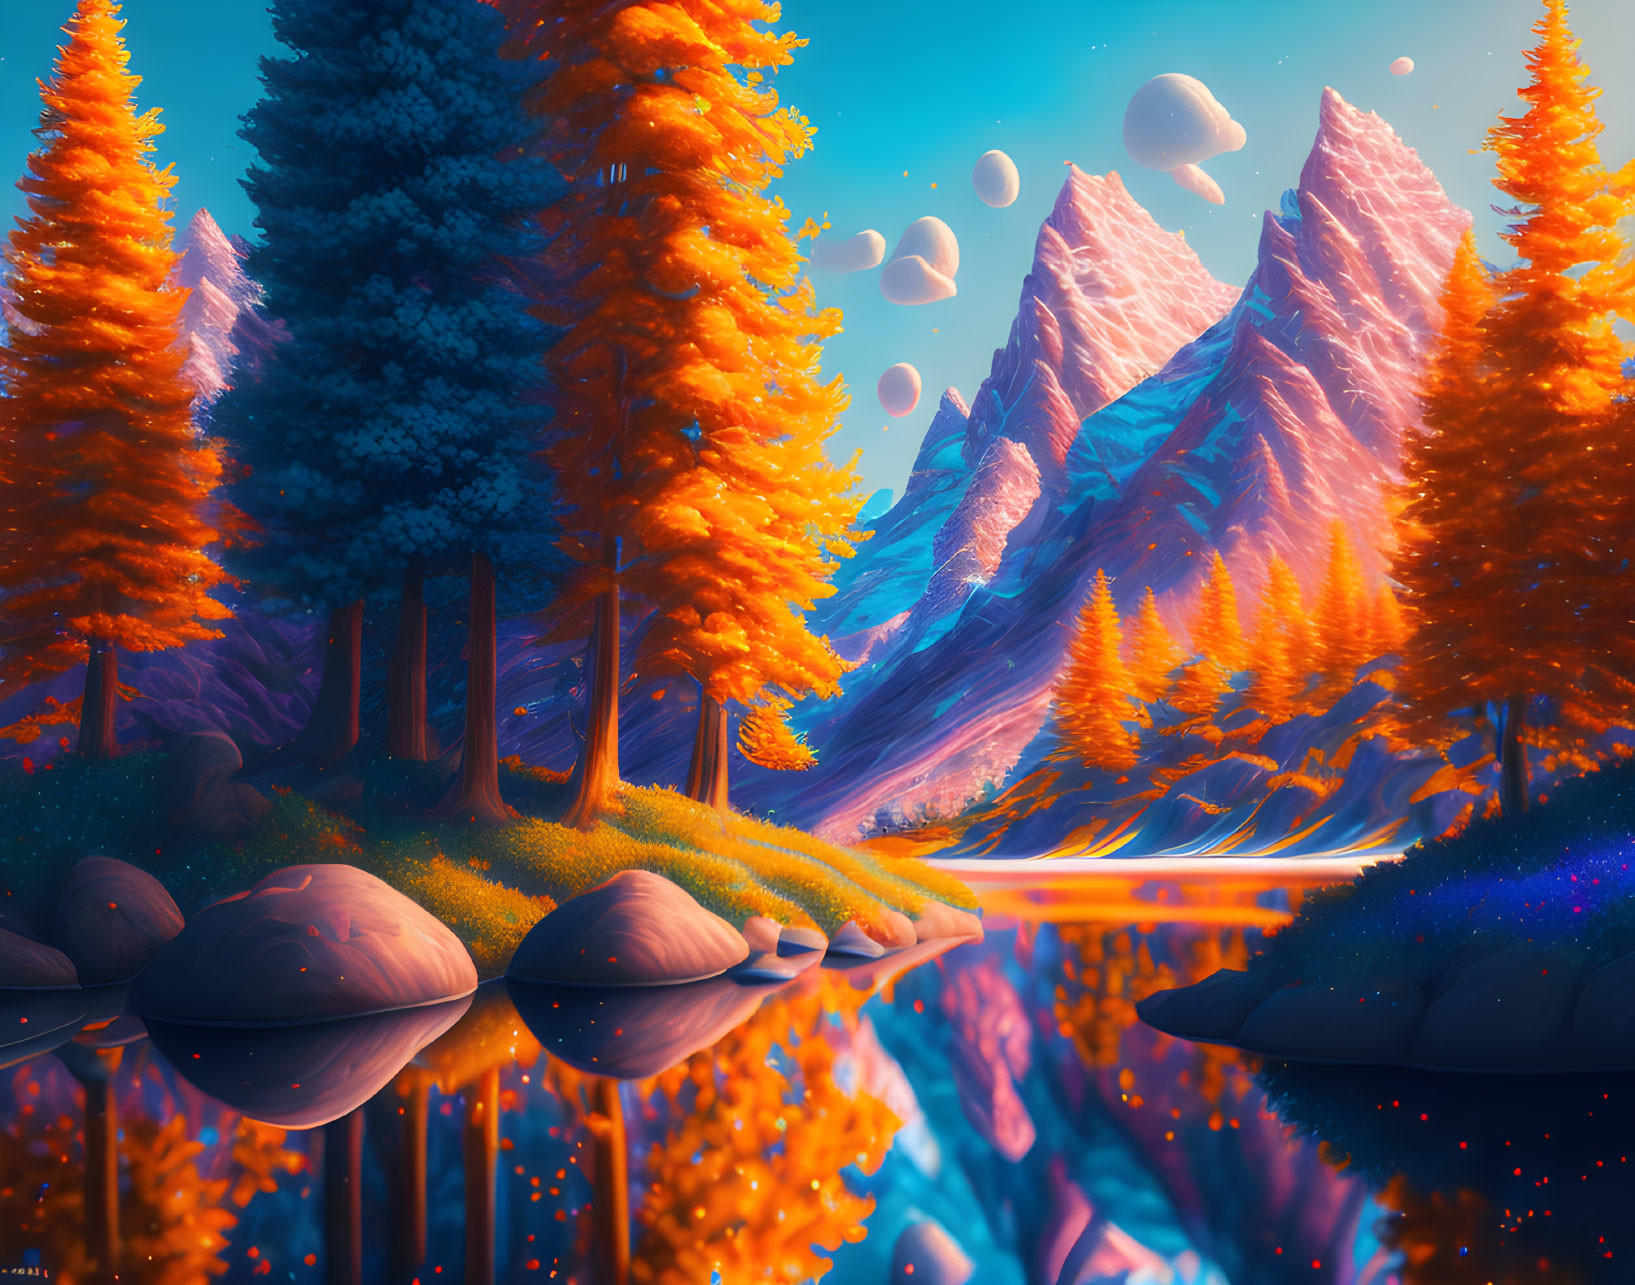 Scenic autumn forest with snowy mountains, river, floating rocks at twilight